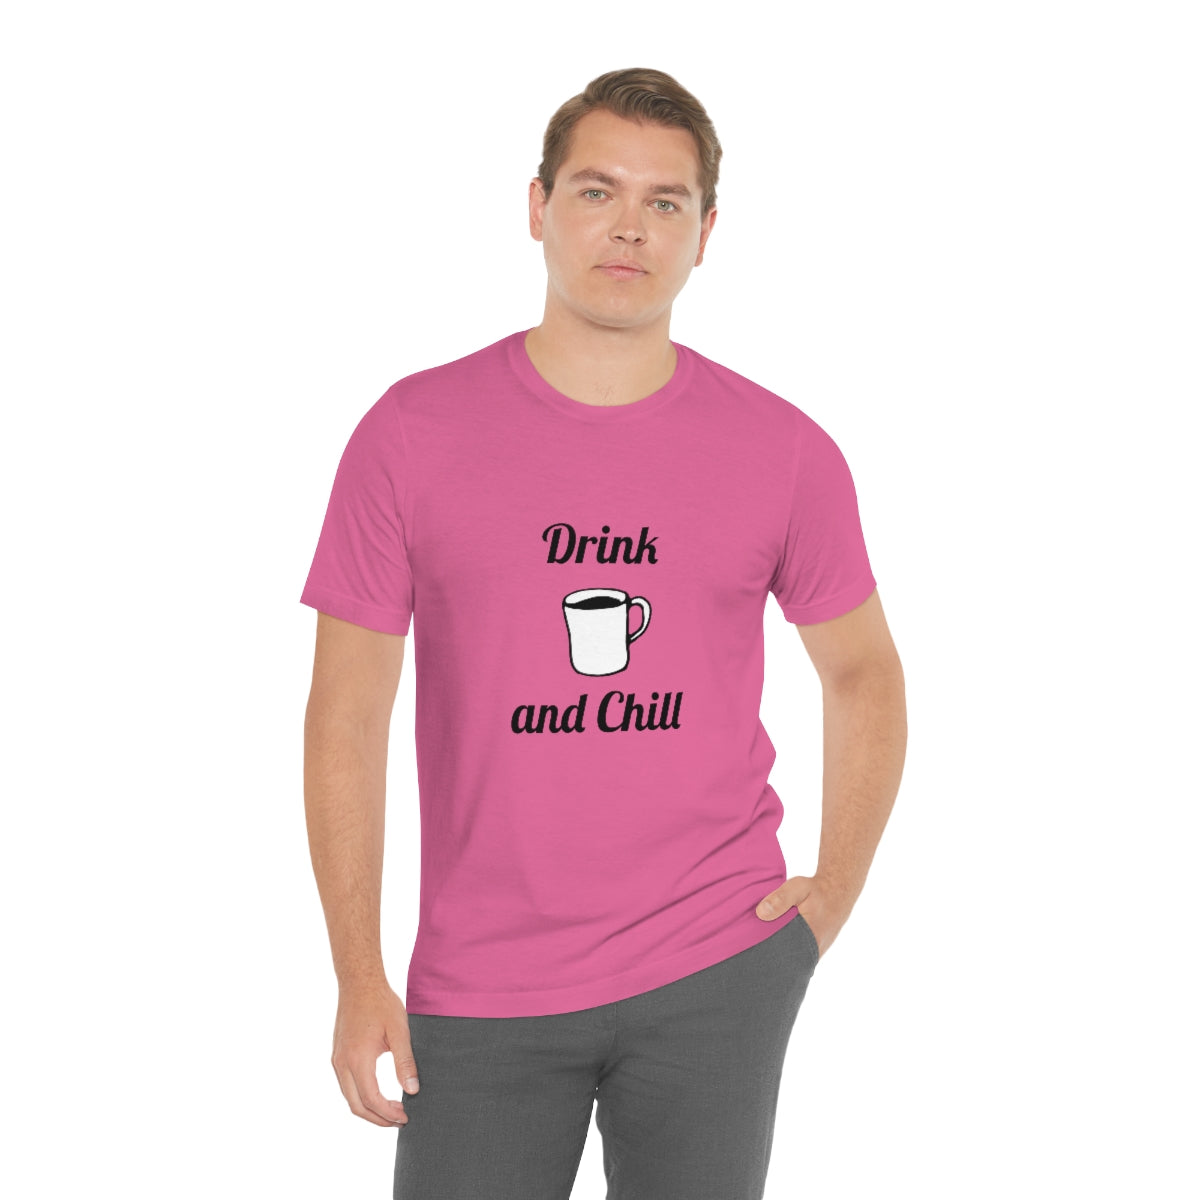 Drink coffee and chill #2 - Funny - Unisex Short Sleeve Tee